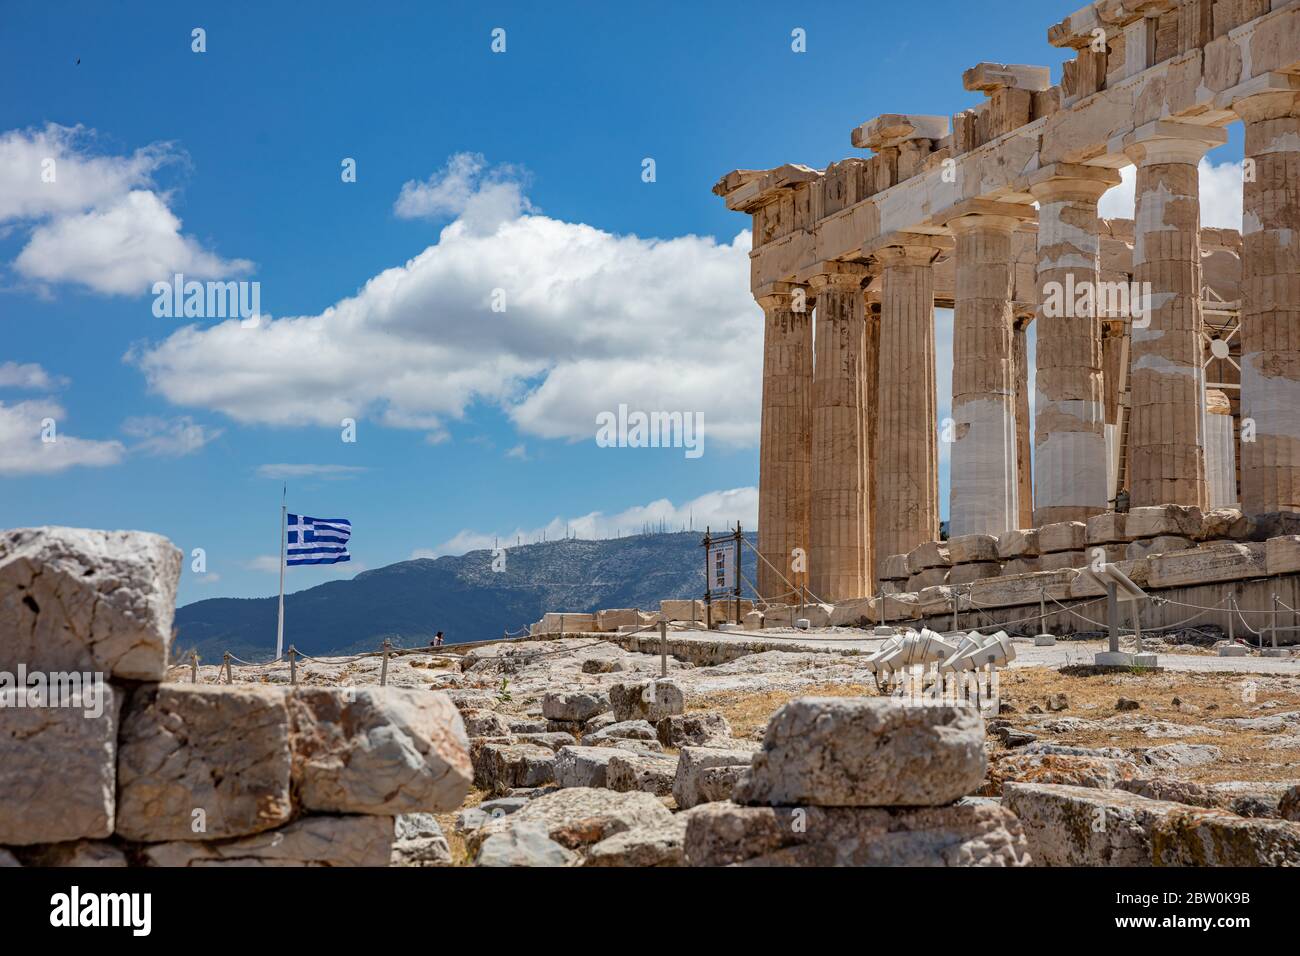 Athens Acropolis, Greece. Parthenon temple and greek flag waving against blue sky background, spring sunny day. Stock Photo